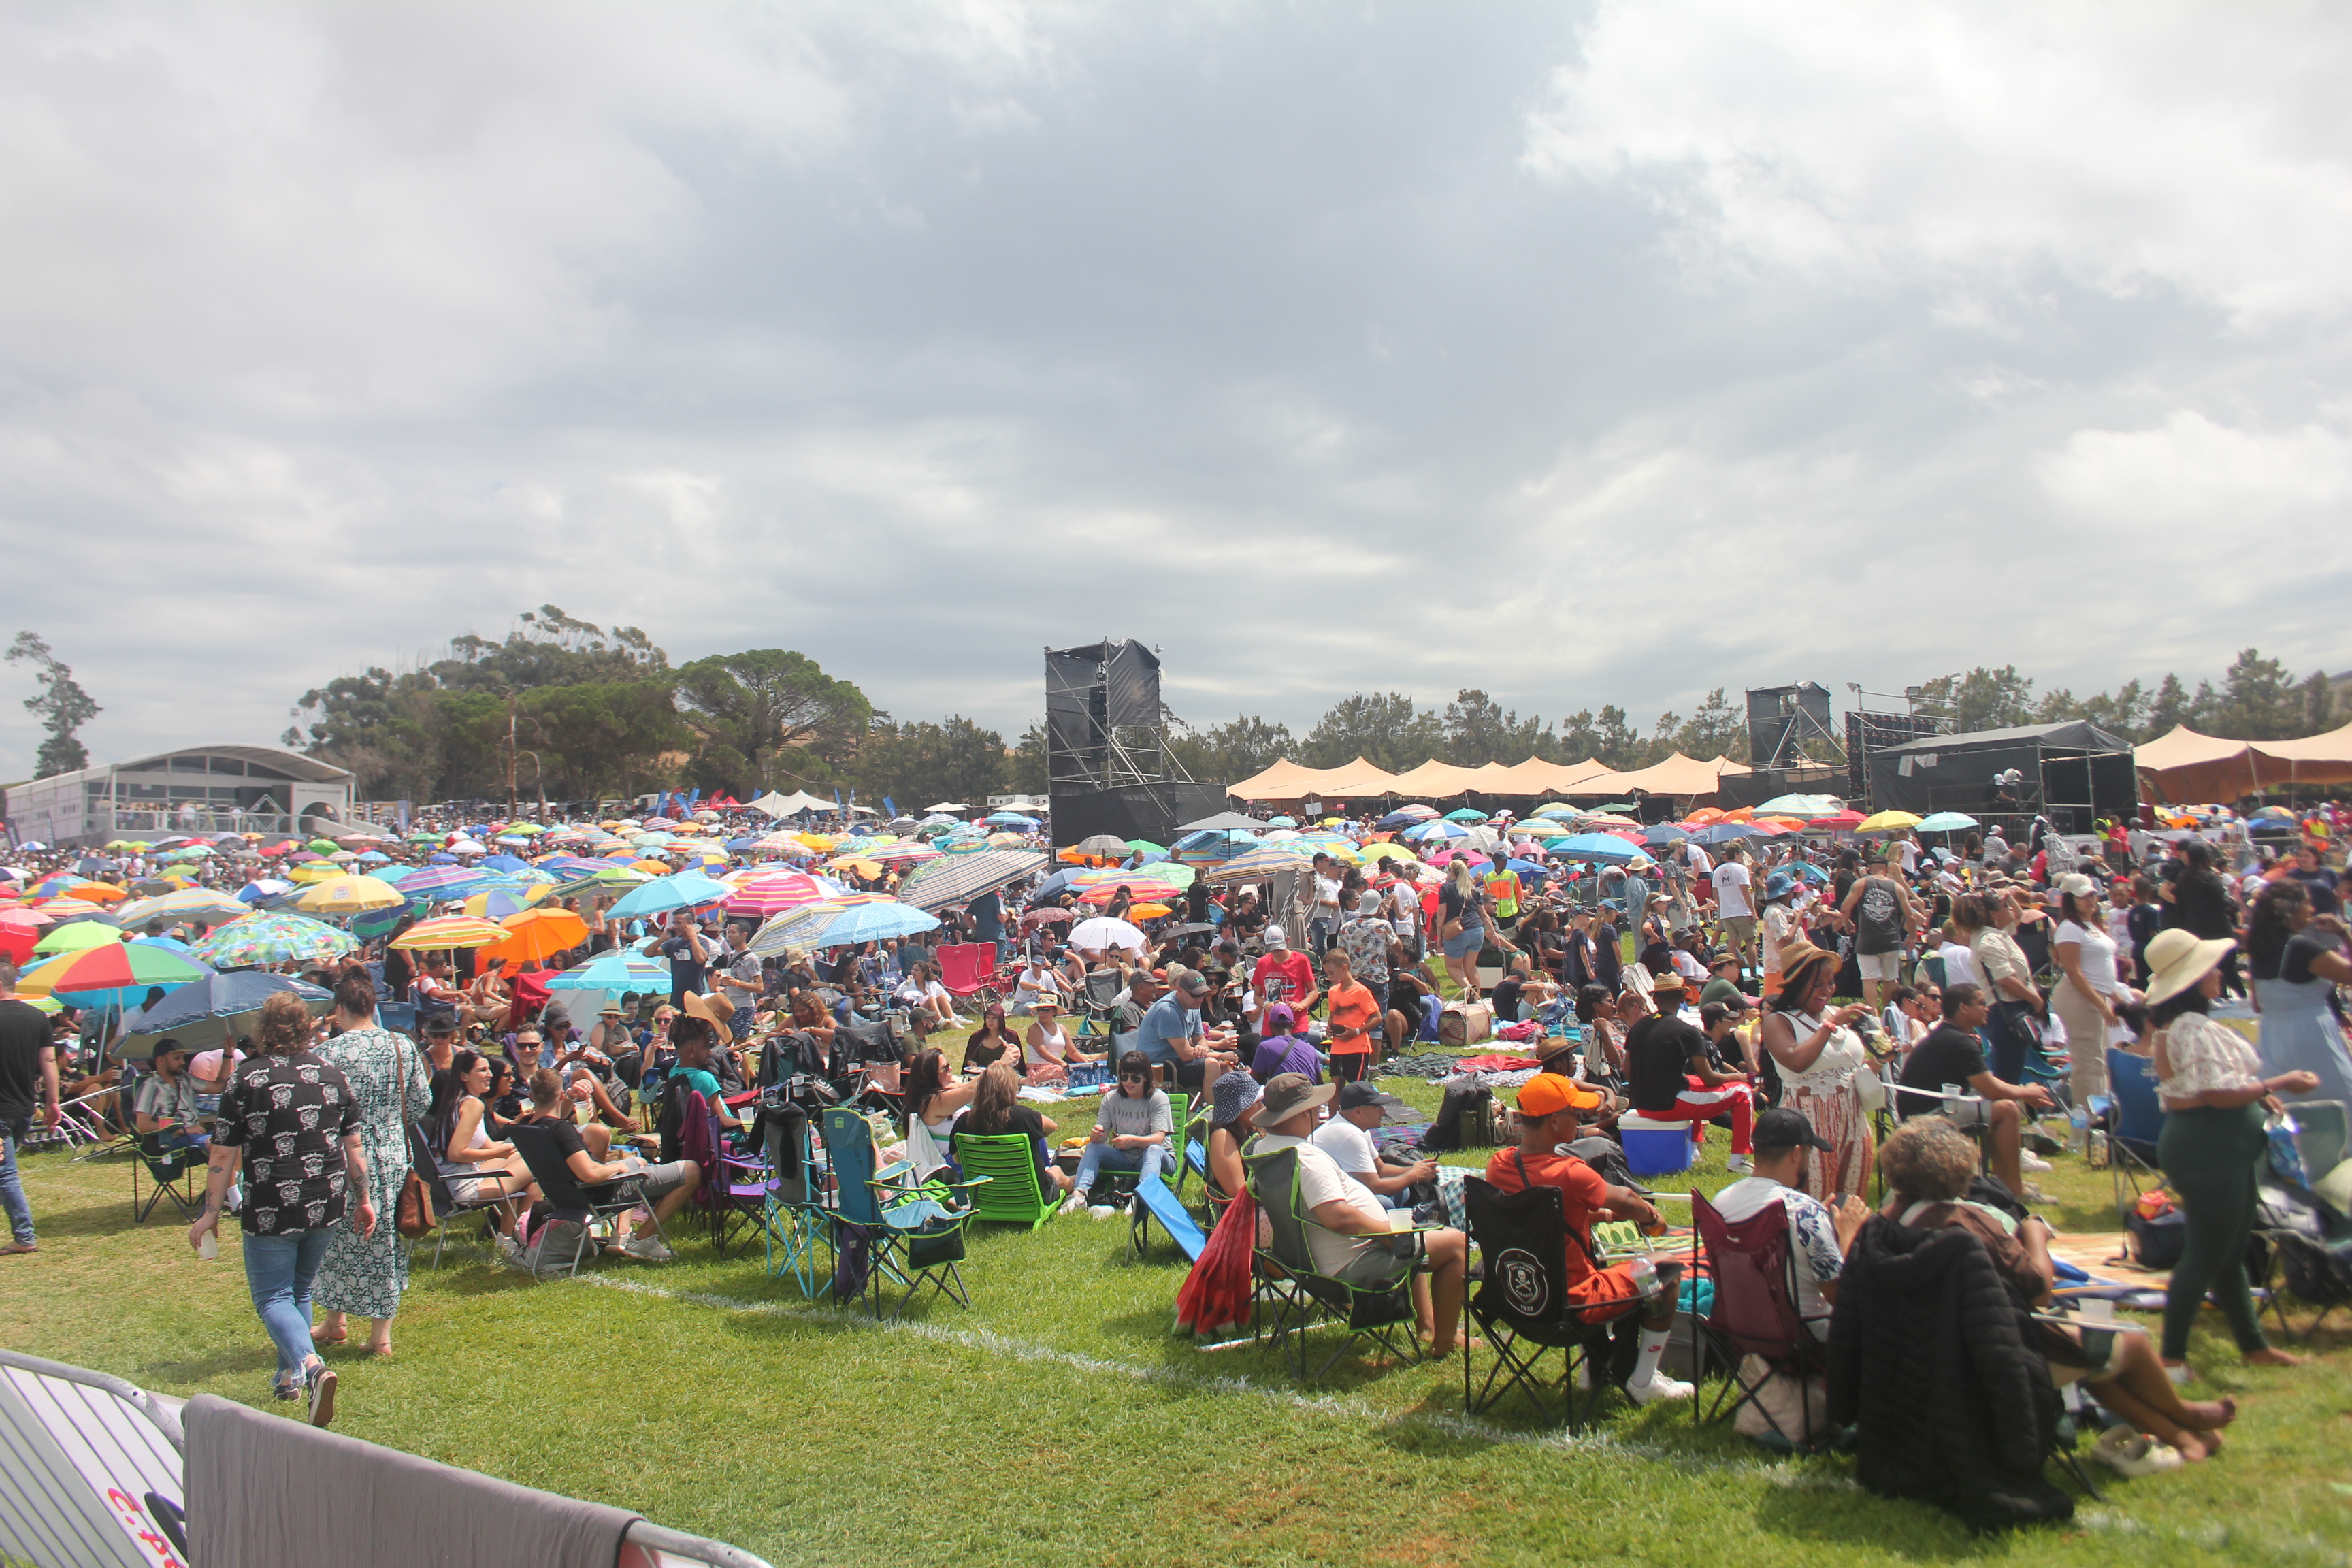 The crowd and their umbrellas stretched across the entire venue at the Galaxy KDay Festival. Image: An Wentzel